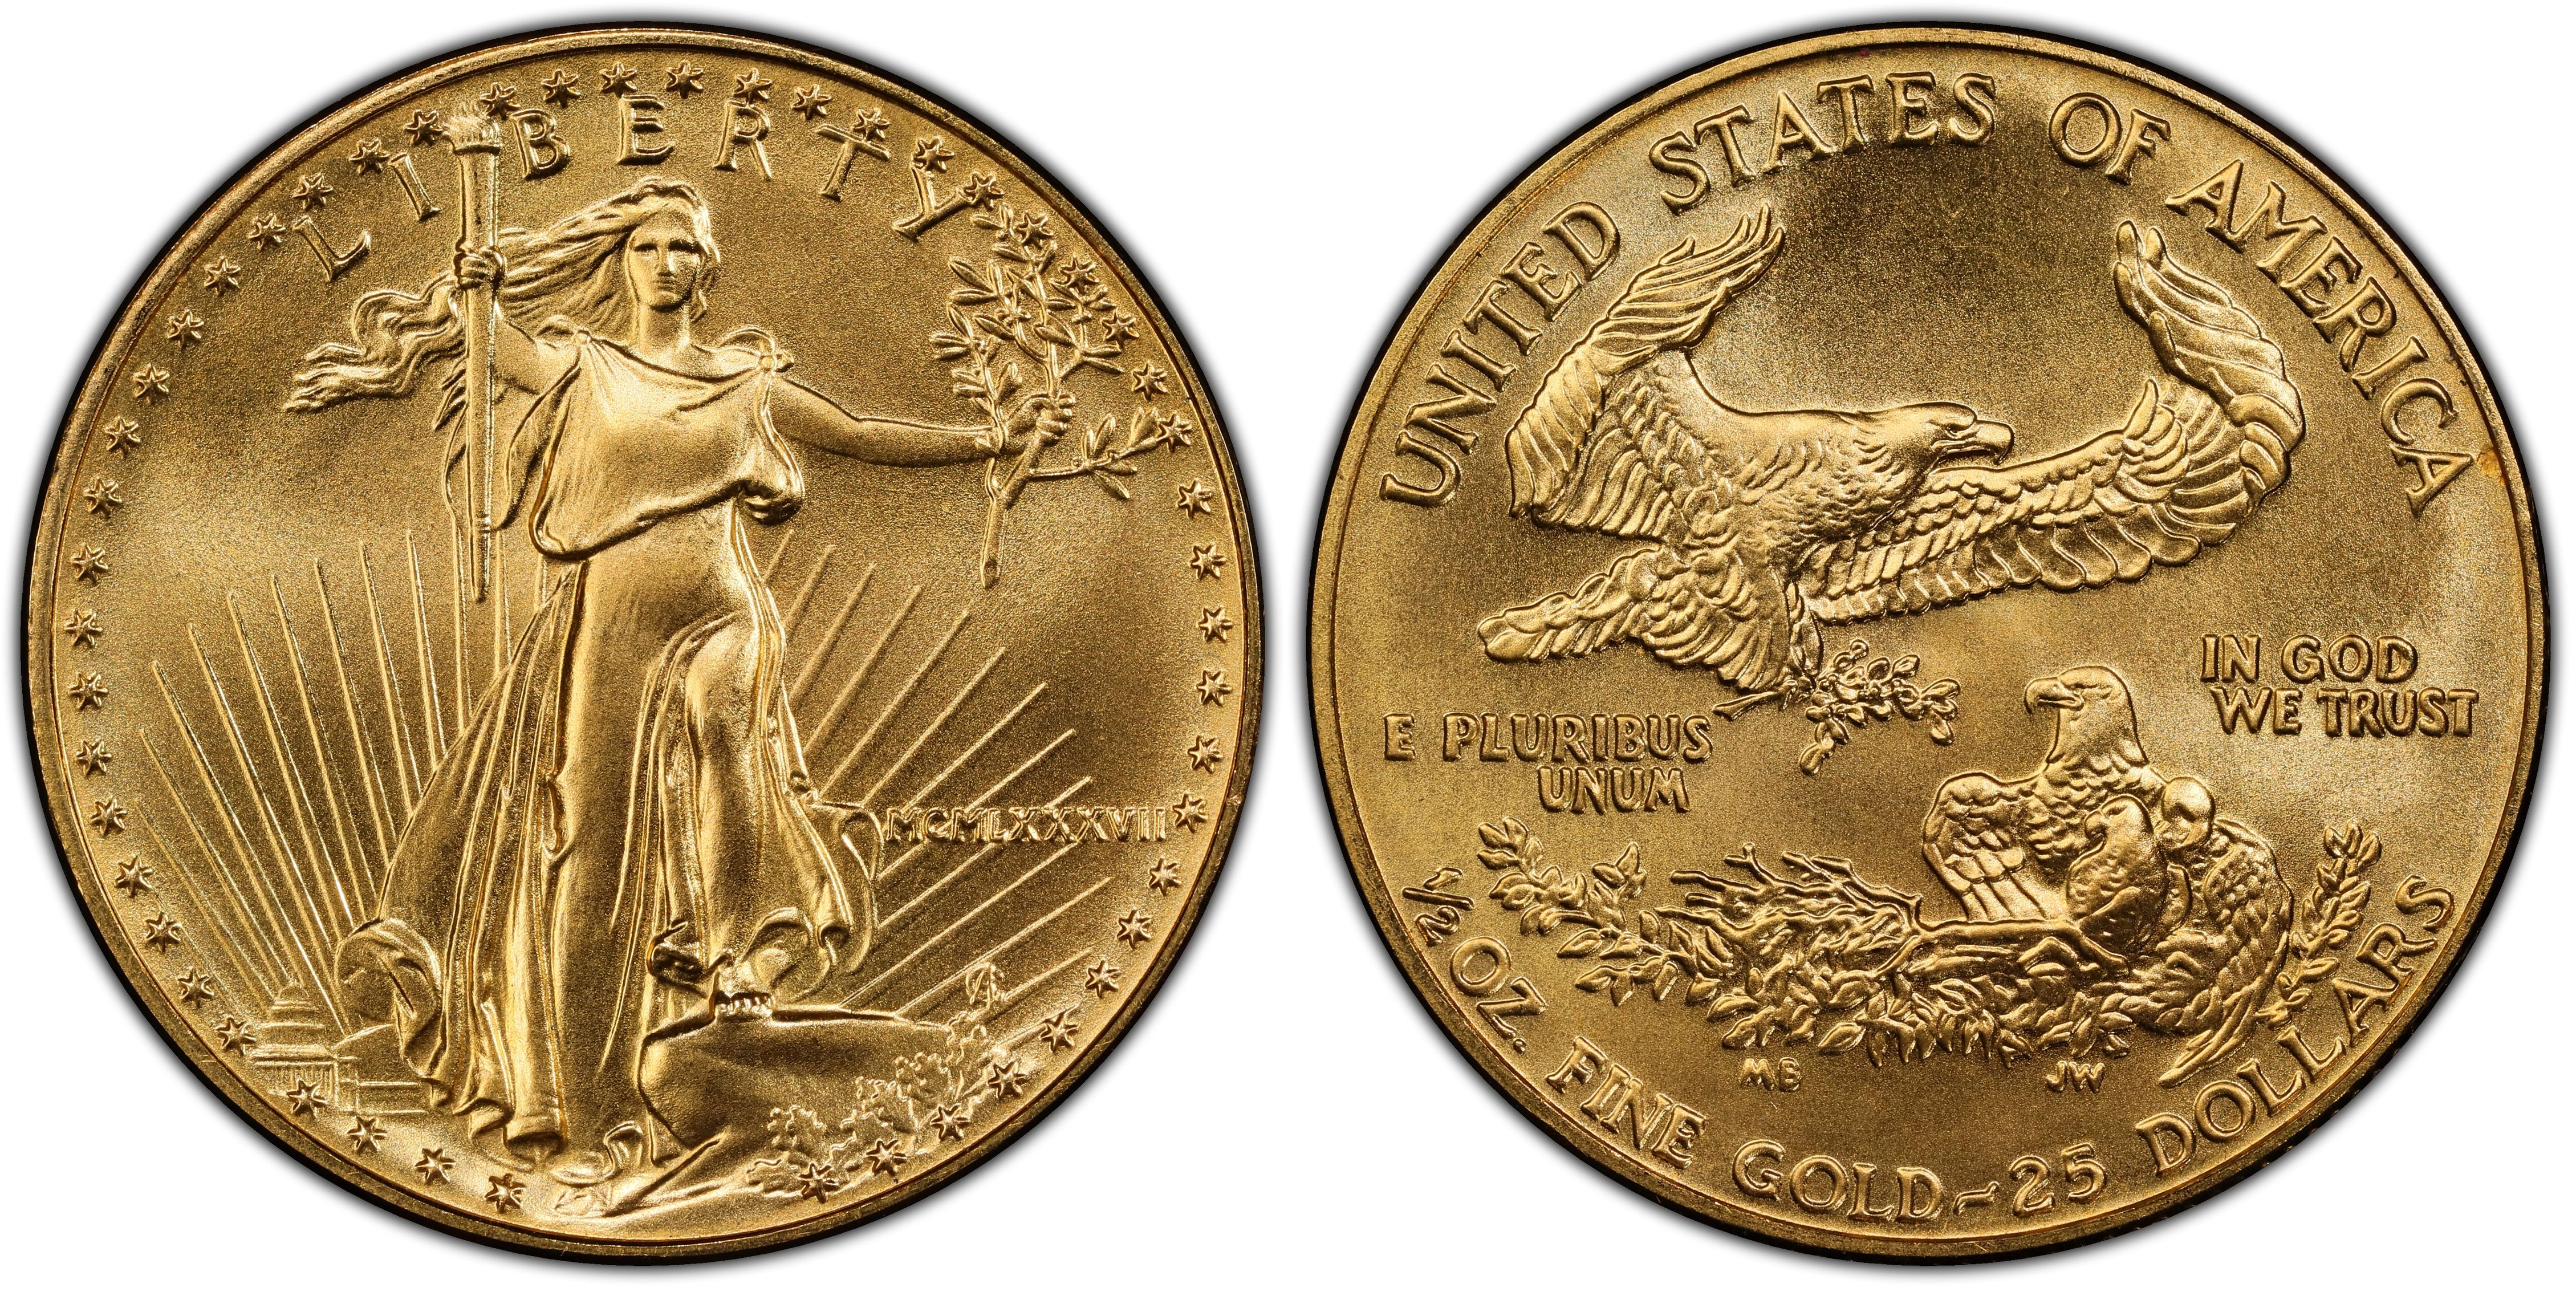 1987 $25 Gold Eagle (Regular Strike) Gold Eagles - PCGS CoinFacts